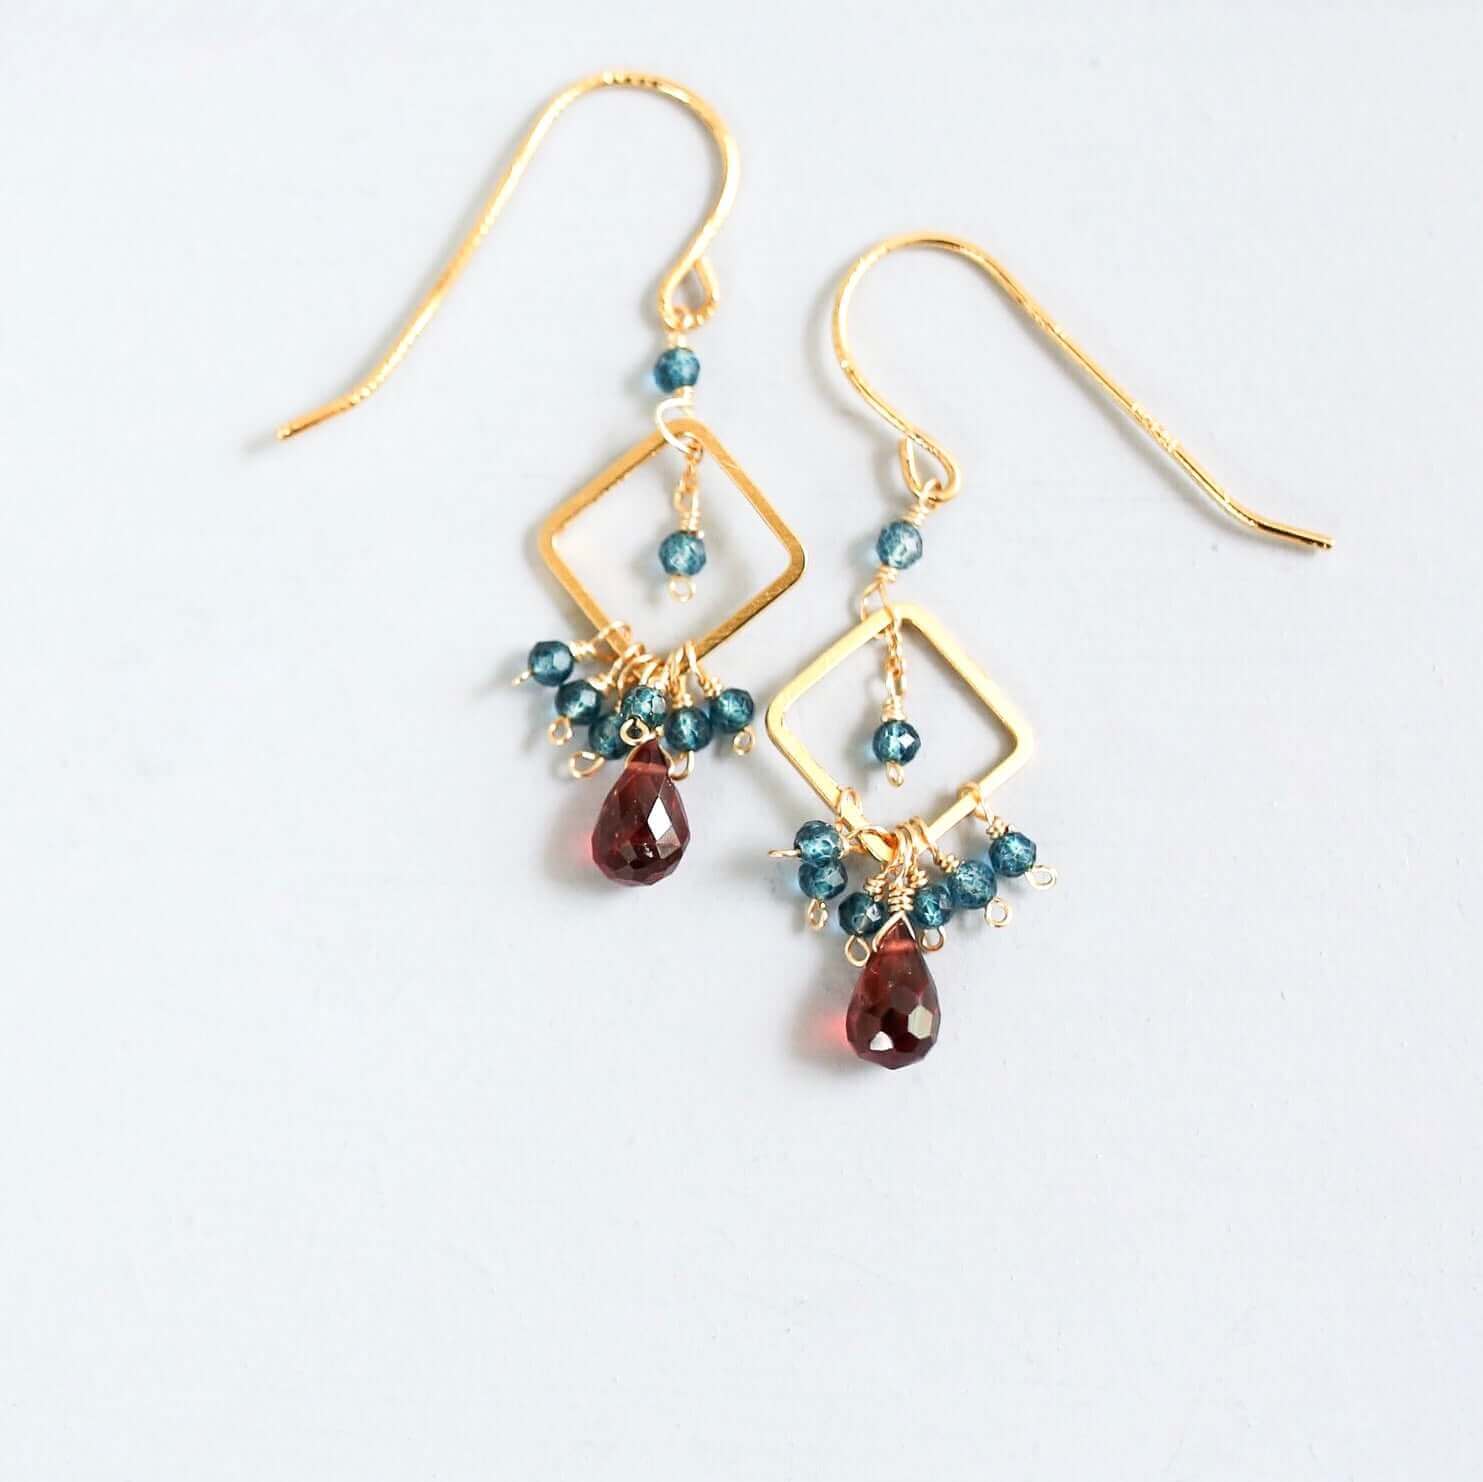 Garnet briolette gemstones with Iolite Accent stones  French Hook Gold Earrings 